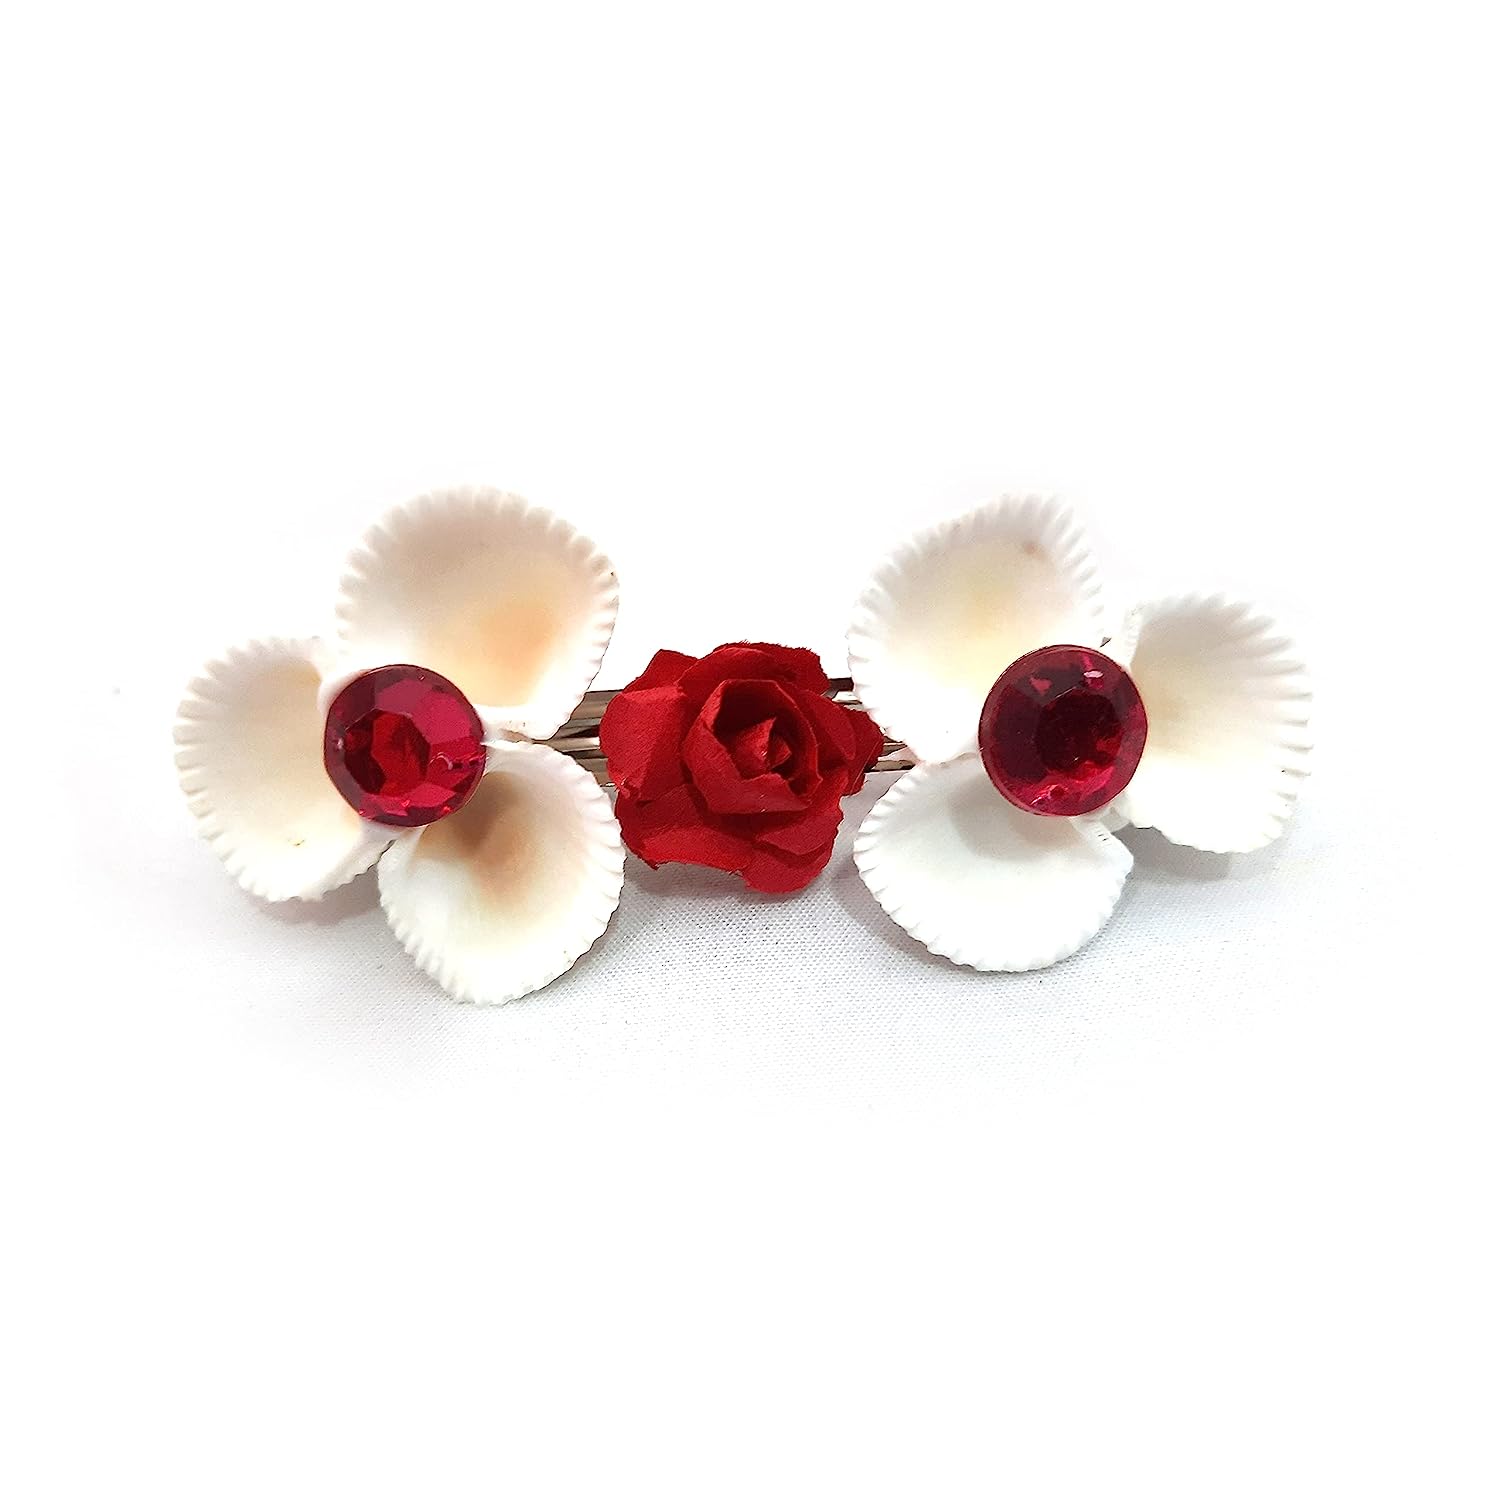 Seashell - Small White Sippi Hair Clip Pack of 3